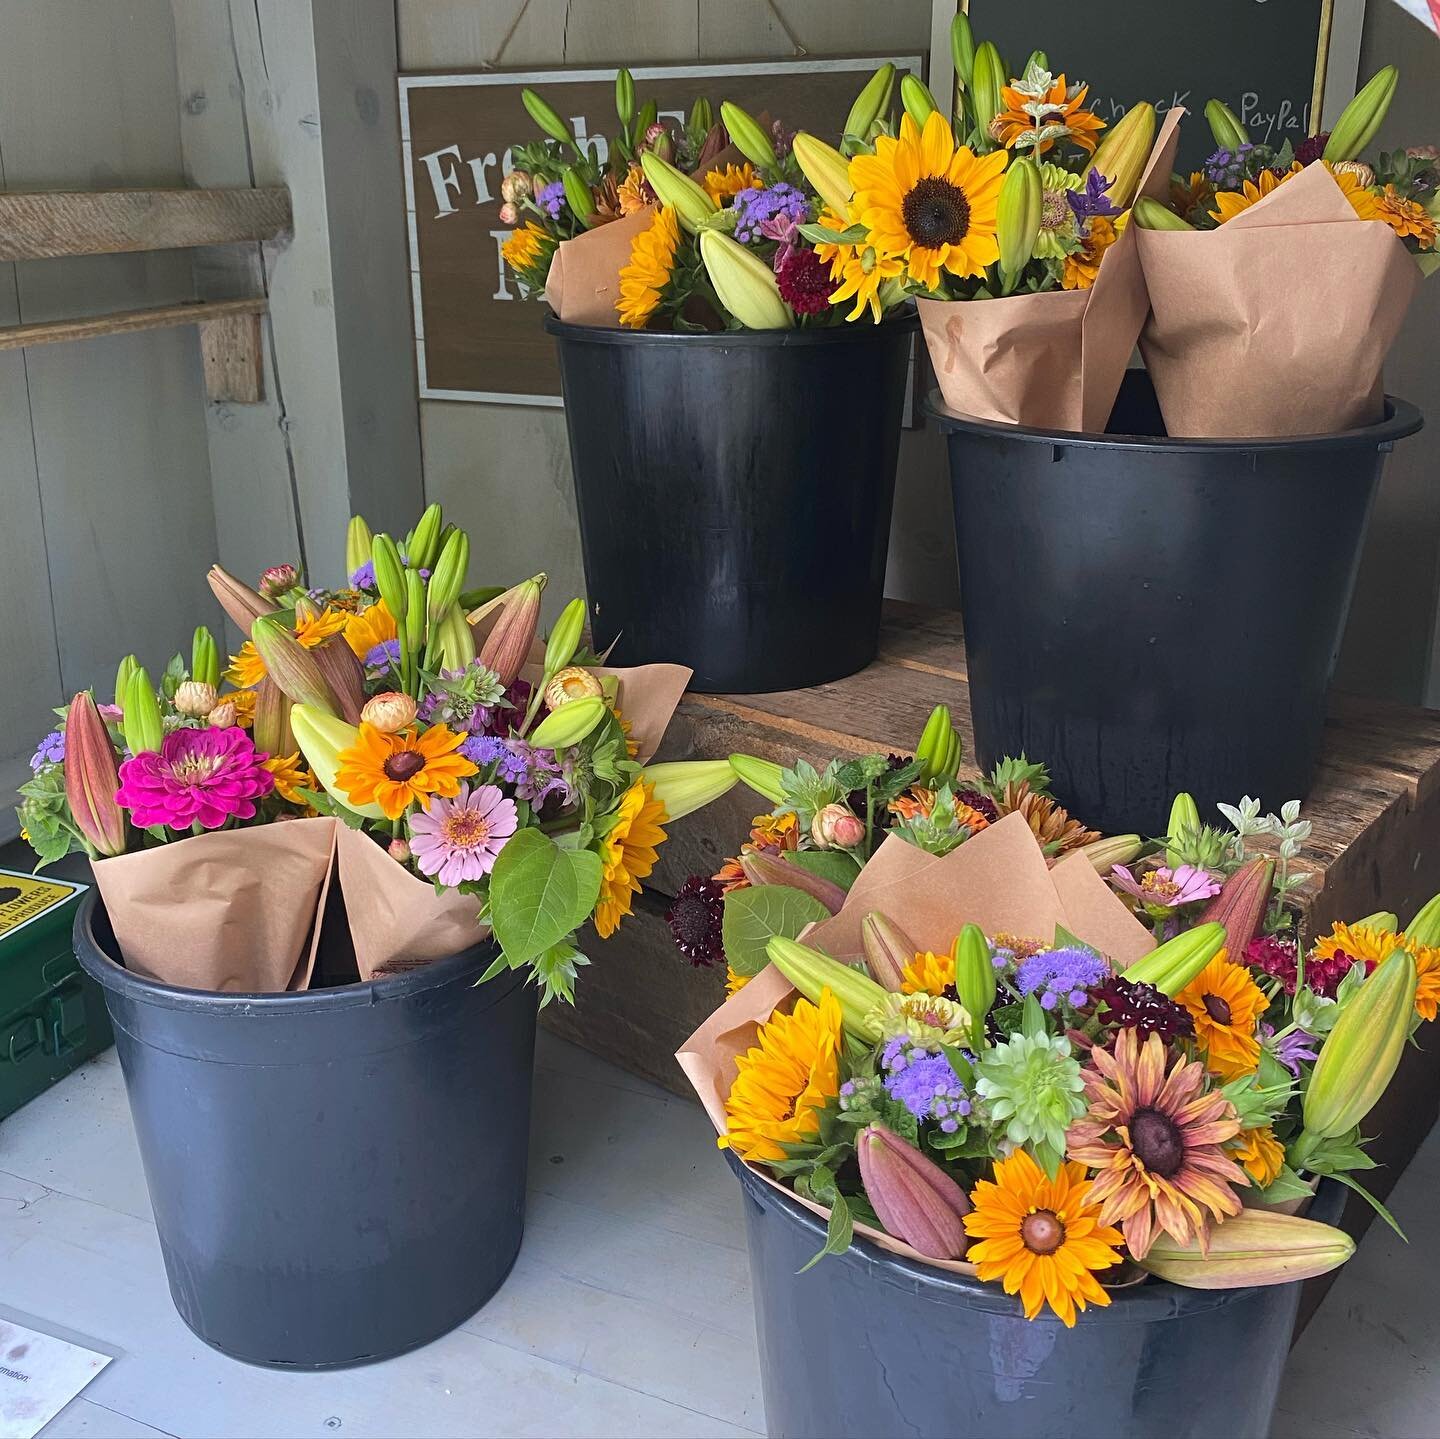 The Flower Cart is OPEN today, Saturday the 17th till 4:00 or sold out, and same hours tomorrow Sunday the 18th, Sleepy Hollow Road North Stonington, CT first house on left. If you see the sign at the top of the road we still have flowers. If you hav